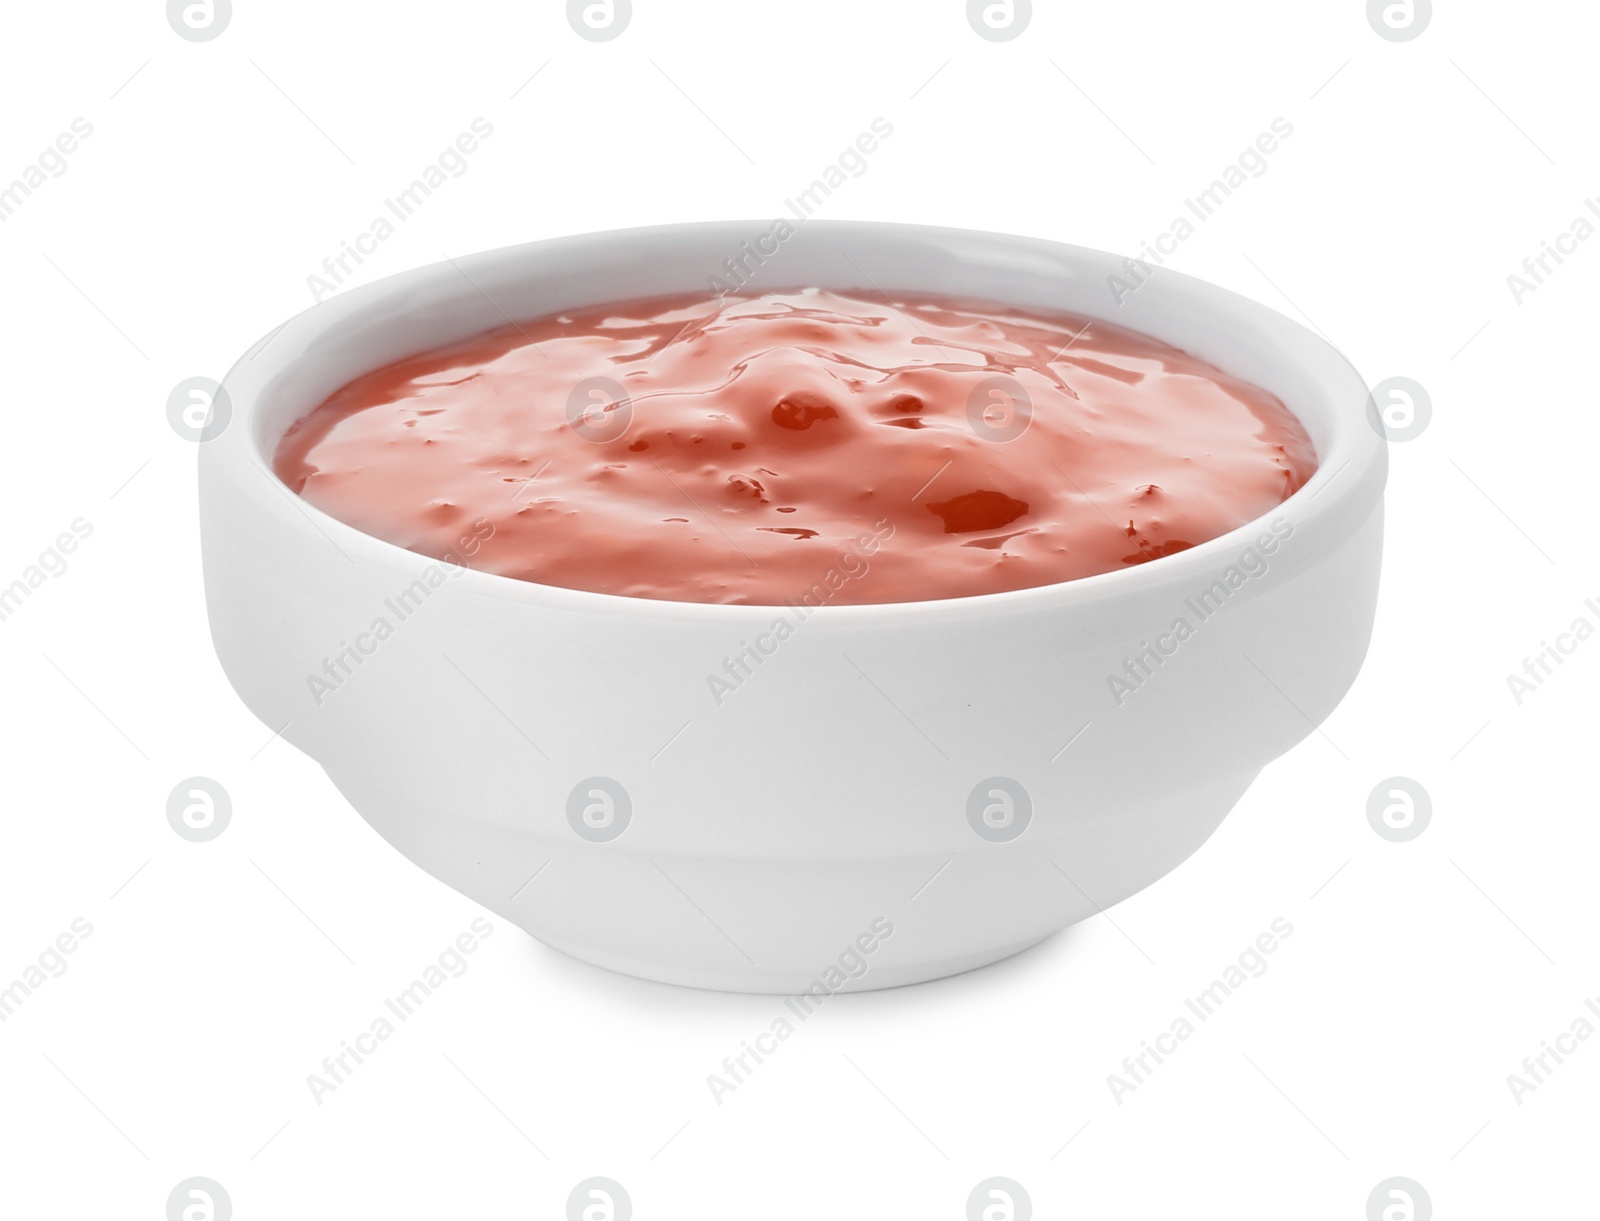 Photo of Tasty chili sauce in bowl isolated on white